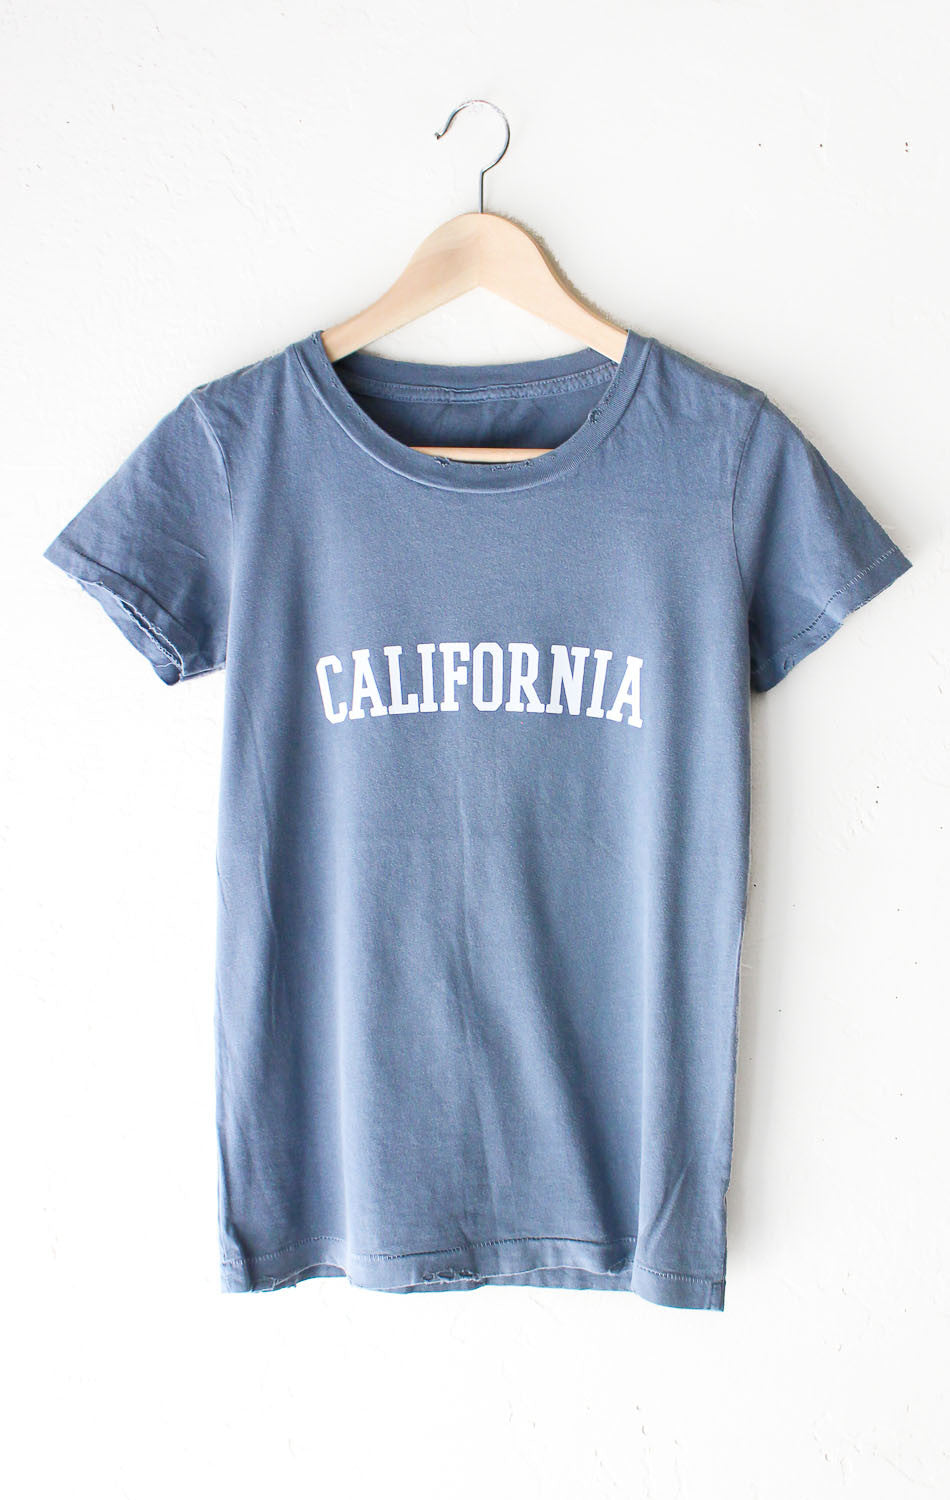 California Destroyed Tee - NYCT CLOTHING